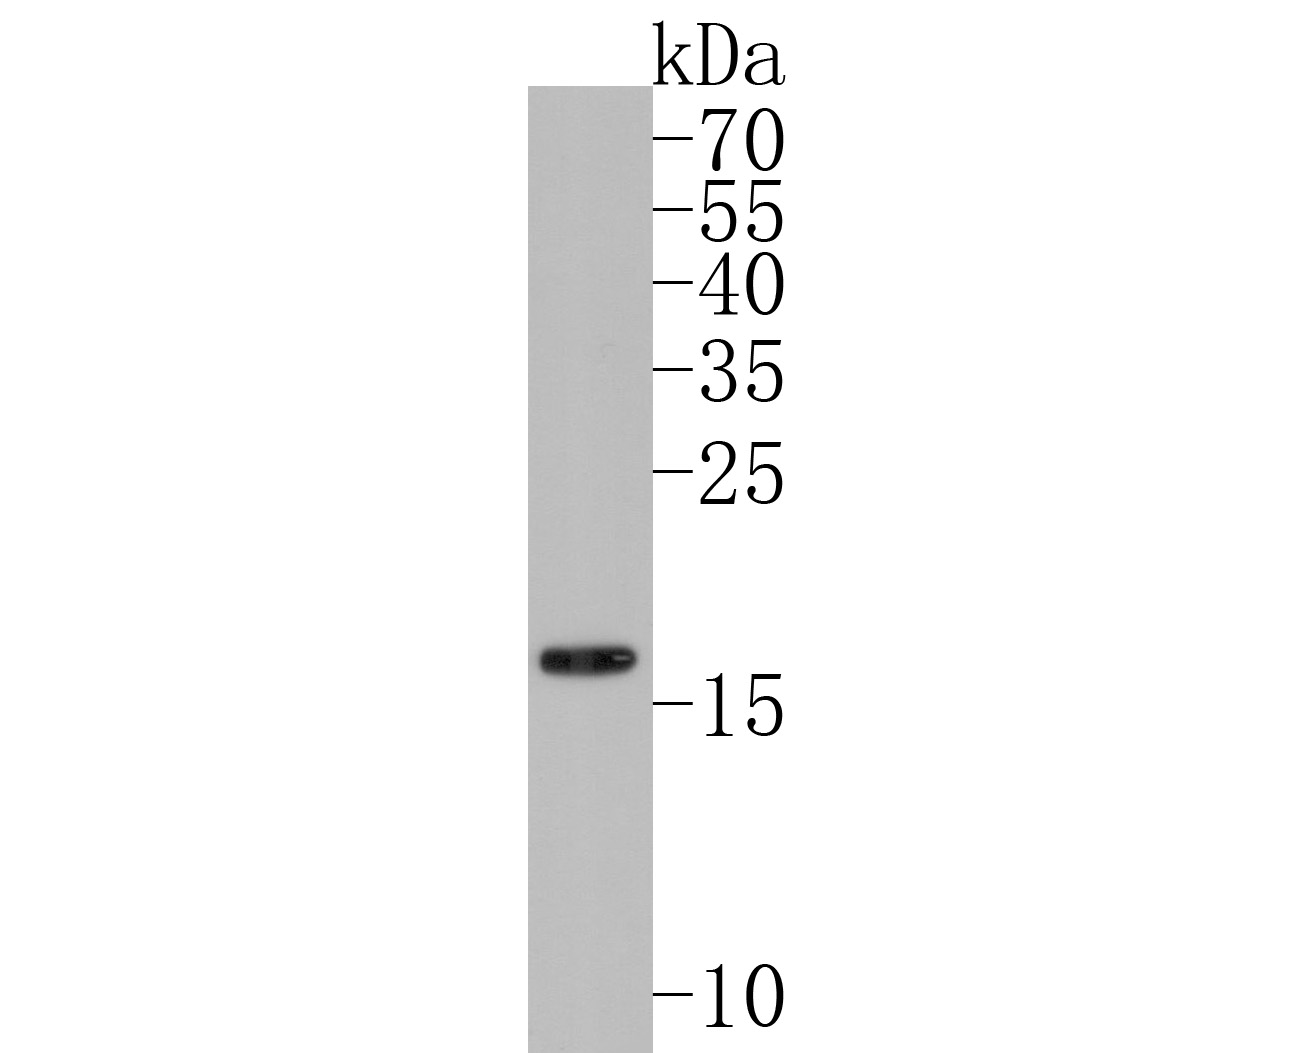 Western blot analysis of Hsp20 on rat skeletal muscle tissue lysates. Proteins were transferred to a PVDF membrane and blocked with 5% BSA in PBS for 1 hour at room temperature. The primary antibody (ET1612-81, 1/500) was used in 5% BSA at room temperature for 2 hours. Goat Anti-Rabbit IgG - HRP Secondary Antibody (HA1001) at 1:200,000 dilution was used for 1 hour at room temperature.